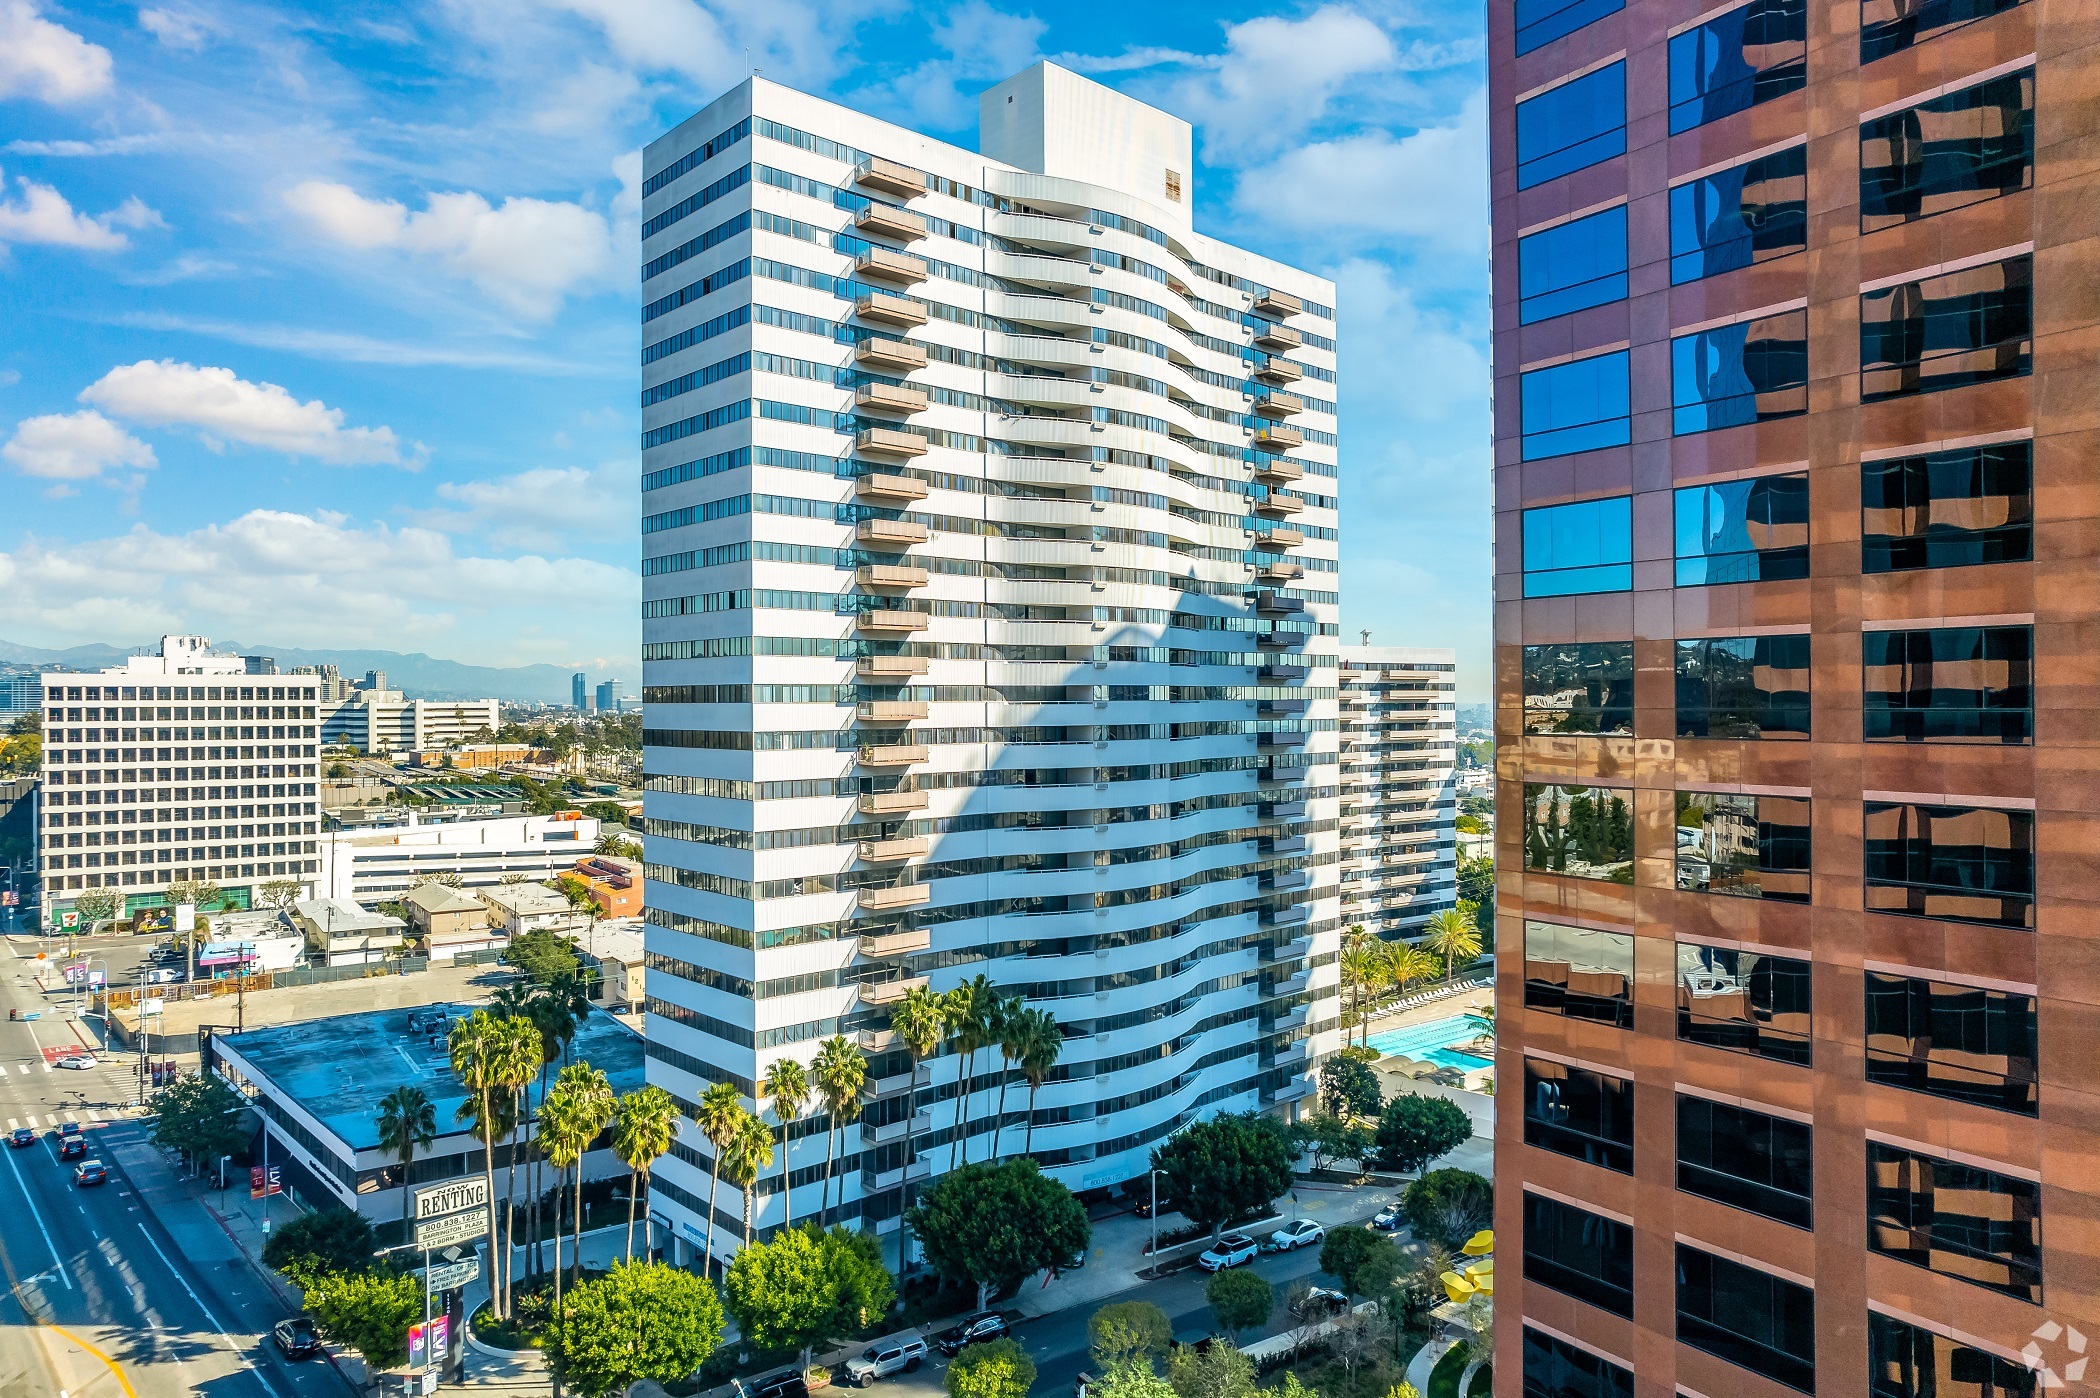 Douglas Emmett expects to start some construction work on Barrington Plaza 11740 Wilshire Blvd. in Los Angeles after a fire broke out at the property in January 2020. (CoStar)